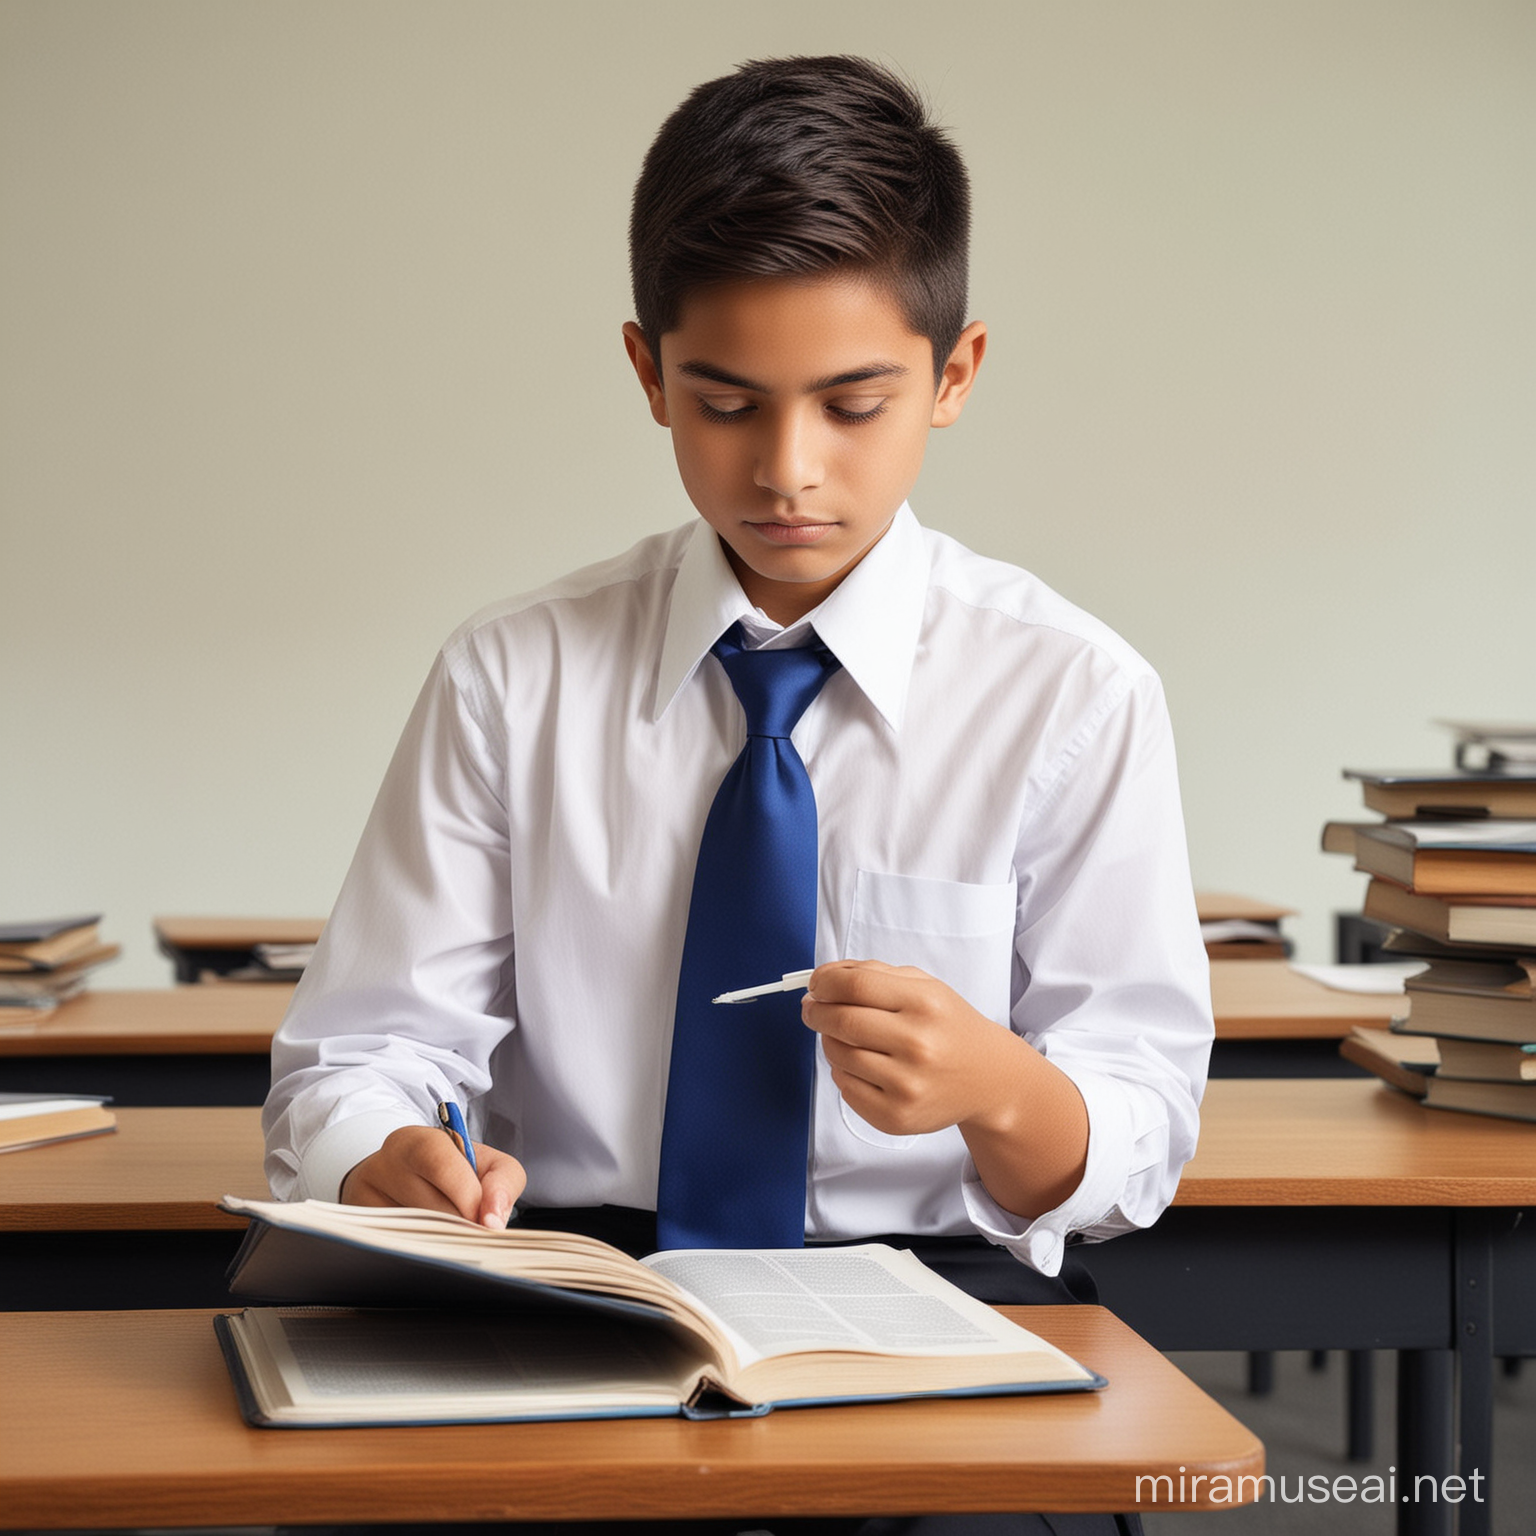 Young Student Studying in Classroom with Books